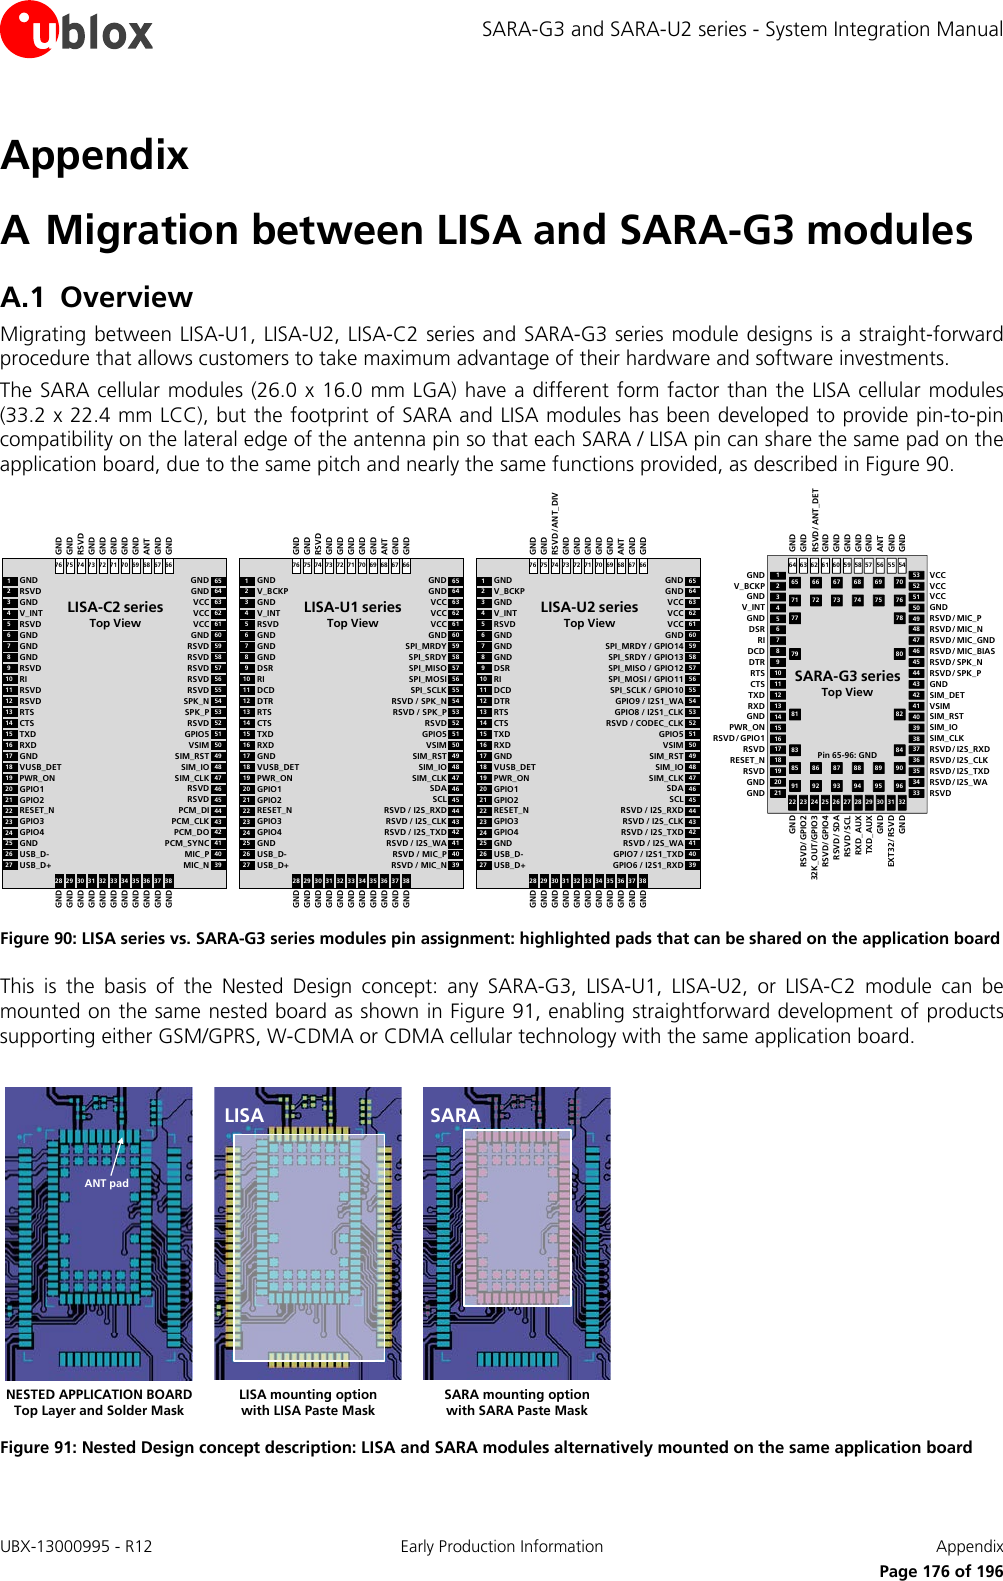 SARA-G3 and SARA-U2 series - System Integration Manual Appendix A Migration between LISA and SARA-G3 modules A.1 Overview Migrating between LISA-U1, LISA-U2, LISA-C2 series and SARA-G3 series module designs is a straight-forward procedure that allows customers to take maximum advantage of their hardware and software investments. The SARA cellular modules (26.0 x 16.0 mm LGA) have a different form factor than the LISA cellular modules  (33.2 x 22.4 mm LCC), but the footprint of SARA and LISA modules has been developed to provide pin-to-pin compatibility on the lateral edge of the antenna pin so that each SARA / LISA pin can share the same pad on the application board, due to the same pitch and nearly the same functions provided, as described in Figure 90. 64 63 61 60 58 57 55 5422 23 25 26 28 29 31 3211108754212119181615131243444647495052533335363839414265 66 67 68 69 7071 72 73 74 75 7677 7879 8081 8283 8485 86 87 88 89 9091 92 93 94 95 96CTSRTSDCDRIV_INTV_BCKPGNDRSVDRESET_NRSVD/GPIO1PWR_ONRXDTXD32017149624 27 305148454037345962 56GNDGNDDSRDTRGNDRSVDGNDGNDRXD_AUXTXD_AUXEXT32/RSVDGNDRSVD/GPIO232K_OUT/GPIO3RSVD/SDARSVD/SCLRSVD/GPIO4GNDGNDGNDRSVD/SPK_PRSVD/MIC_BIASRSVD/MIC_GNDRSVD/MIC_PGNDVCCVCCRSVDRSVD/I2S_TXDRSVD/I2S_CLKSIM_CLKSIM_IOVSIMSIM_DETVCCRSVD/MIC_NRSVD/SPK_NSIM_RSTRSVD/I2S_RXDRSVD/I2S_WAGNDGNDGNDGNDGNDGNDGNDGNDGNDRSVD/ANT_DETANTSARA-G3 seriesTop ViewPin 65-96: GND65646362616059585756555453525150494847464544434241GNDVCCVCCVCCGNDSPI_MRDYSPI_SRDYSPI_MISOSPI_MOSISPI_SCLKRSVD / SPK_NGNDRSVD / SPK_PRSVDGPIO5VSIMSIM_RSTSIM_IOSIM_CLKSDASCLRSVD / I2S_RXDRSVD / I2S_CLKRSVD / I2S_TXDRSVD / I2S_WA12345678910111213141516171819202122232425V_BCKPGNDV_INTRSVDGNDGNDGNDDSRRIDCDDTRGNDRTSCTSTXDRXDGNDVUSB_DETPWR_ONGPIO1GPIO2RESET_NGPIO3GPIO4GND2627USB_D-USB_D+4039RSVD / MIC_PRSVD / MIC_N28 29 30 31 32 33 34 35 36 37 3876 75 74 73 72 71 70 69 68 67 66LISA-U1 seriesTop ViewGNDRSVDGNDGNDGNDGNDGNDANTGNDGNDGNDGNDGNDGNDGNDGNDGNDGNDGNDGNDGNDGND65646362616059585756555453525150494847464544434241GNDVCCVCCVCCGNDSPI_MRDY / GPIO14SPI_SRDY / GPIO13SPI_MISO / GPIO12SPI_MOSI / GPIO11SPI_SCLK / GPIO10GPIO9 / I2S1_WAGNDGPIO8 / I2S1_CLKRSVD / CODEC_CLKGPIO5VSIMSIM_RSTSIM_IOSIM_CLKSDASCLRSVD / I2S_RXDRSVD / I2S_CLKRSVD / I2S_TXDRSVD / I2S_WA12345678910111213141516171819202122232425V_BCKPGNDV_INTRSVDGNDGNDGNDDSRRIDCDDTRGNDRTSCTSTXDRXDGNDVUSB_DETPWR_ONGPIO1GPIO2RESET_NGPIO3GPIO4GND2627USB_D-USB_D+4039GPIO7 / I2S1_TXDGPIO6 / I2S1_RXD28 29 30 31 32 33 34 35 36 37 3876 75 74 73 72 71 70 69 68 67 66LISA-U2 seriesTop ViewGNDRSVD/ANT_DIVGNDGNDGNDGNDGNDANTGNDGNDGNDGNDGNDGNDGNDGNDGNDGNDGNDGNDGNDGND65646362616059585756555453525150494847464544434241GNDVCCVCCVCCGNDRSVDRSVDRSVDRSVDRSVDSPK_NGNDSPK_PRSVDGPIO5VSIMSIM_RSTSIM_IOSIM_CLKRSVDRSVDPCM_DIPCM_CLKPCM_DOPCM_SYNC12345678910111213141516171819202122232425RSVDGNDV_INTRSVDGNDGNDGNDRSVDRIRSVDRSVDGNDRTSCTSTXDRXDGNDVUSB_DETPWR_ONGPIO1GPIO2RESET_NGPIO3GPIO4GND2627USB_D-USB_D+4039MIC_PMIC_N28 29 30 31 32 33 34 35 36 37 3876 75 74 73 72 71 70 69 68 67 66LISA-C2 seriesTop ViewGNDRSVDGNDGNDGNDGNDGNDANTGNDGNDGNDGNDGNDGNDGNDGNDGNDGNDGNDGNDGNDGND Figure 90: LISA series vs. SARA-G3 series modules pin assignment: highlighted pads that can be shared on the application board This is the basis of the Nested Design concept: any  SARA-G3, LISA-U1, LISA-U2,  or  LISA-C2 module can be mounted on the same nested board as shown in Figure 91, enabling straightforward development of products supporting either GSM/GPRS, W-CDMA or CDMA cellular technology with the same application board.  LISANESTED APPLICATION BOARDTop Layer and Solder MaskLISA mounting optionwith LISA Paste MaskSARASARA mounting optionwith SARA Paste MaskANT pad Figure 91: Nested Design concept description: LISA and SARA modules alternatively mounted on the same application board UBX-13000995 - R12 Early Production Information Appendix      Page 176 of 196 